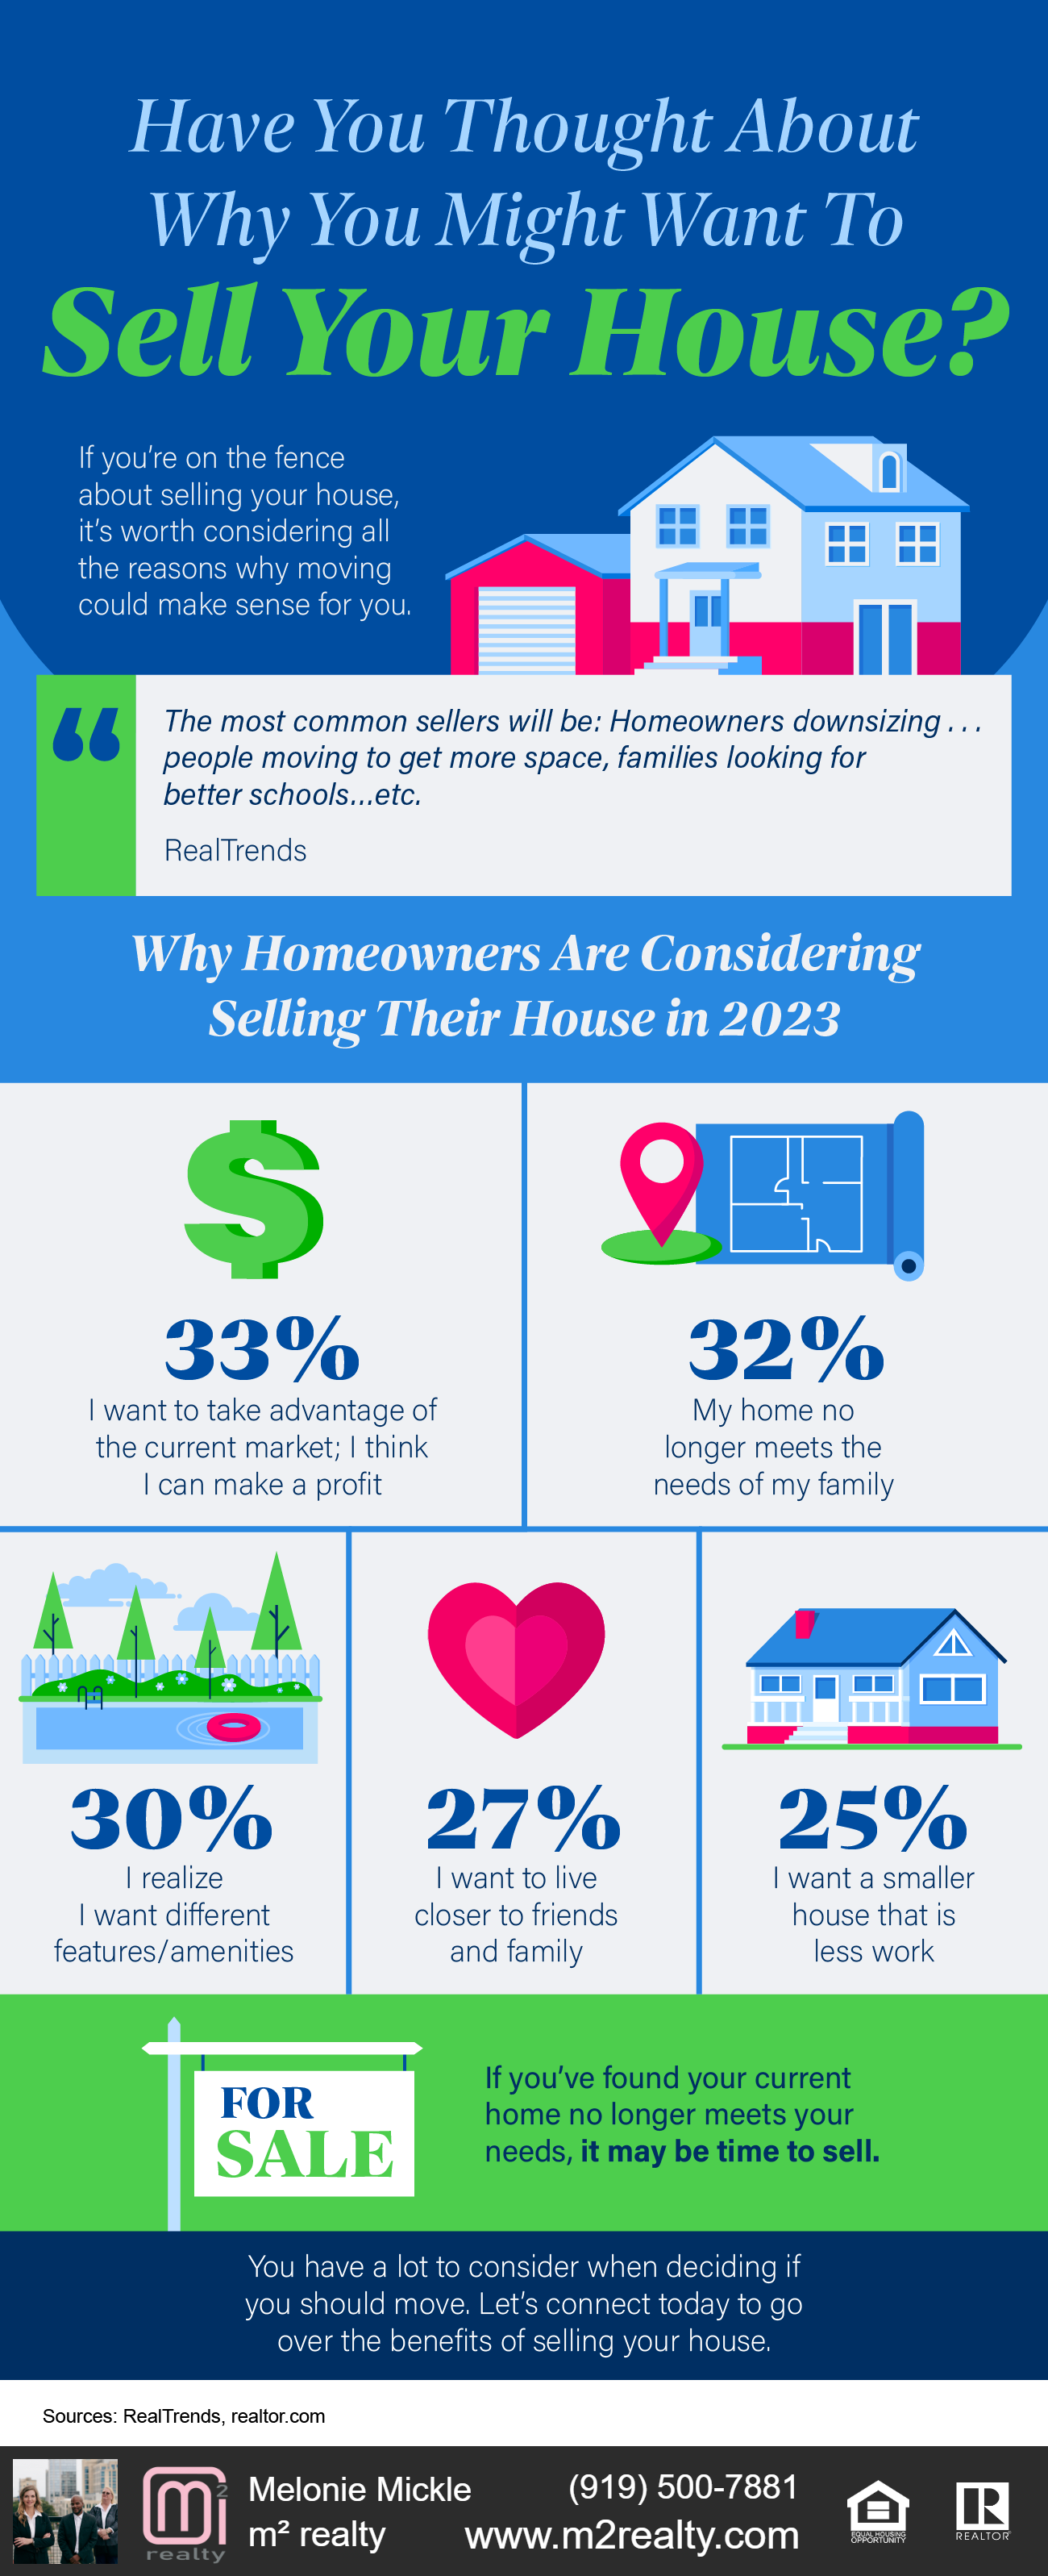 Some Highlights If you’re on the fence about selling your house, it’s worth considering all the reasons why moving could make sense for you. If you find your home no longer meets your needs, it may be time to sell. You have a lot to consider when deciding if you should move. Let’s connect today to go over the benefits of selling your house.